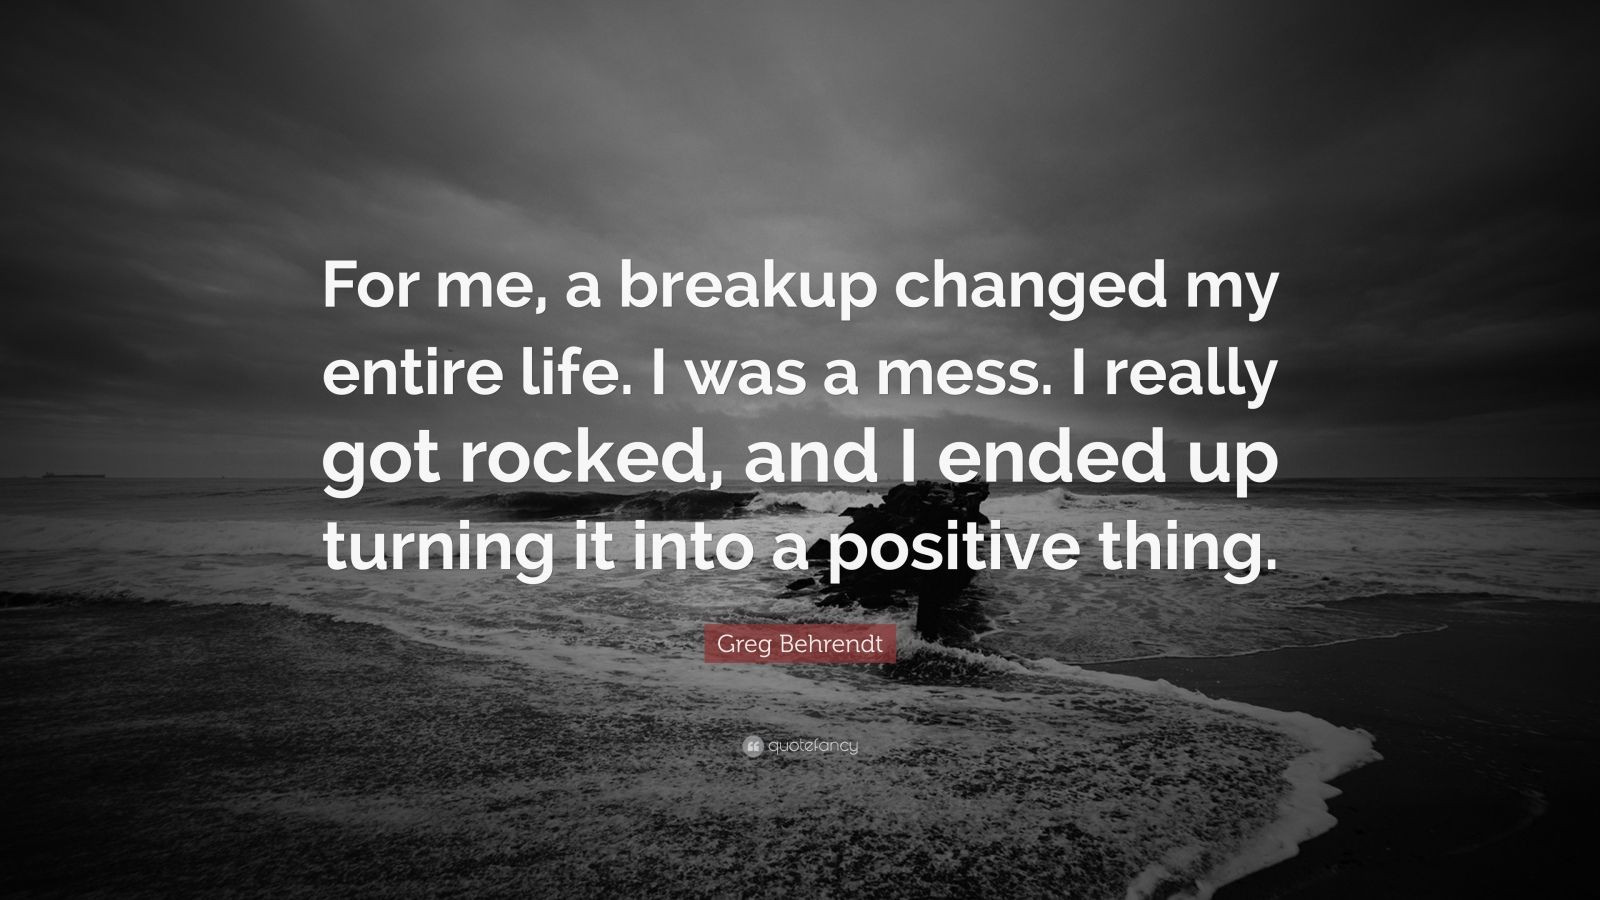 Positive Break Up Quotes
 Greg Behrendt Quote “For me a breakup changed my entire